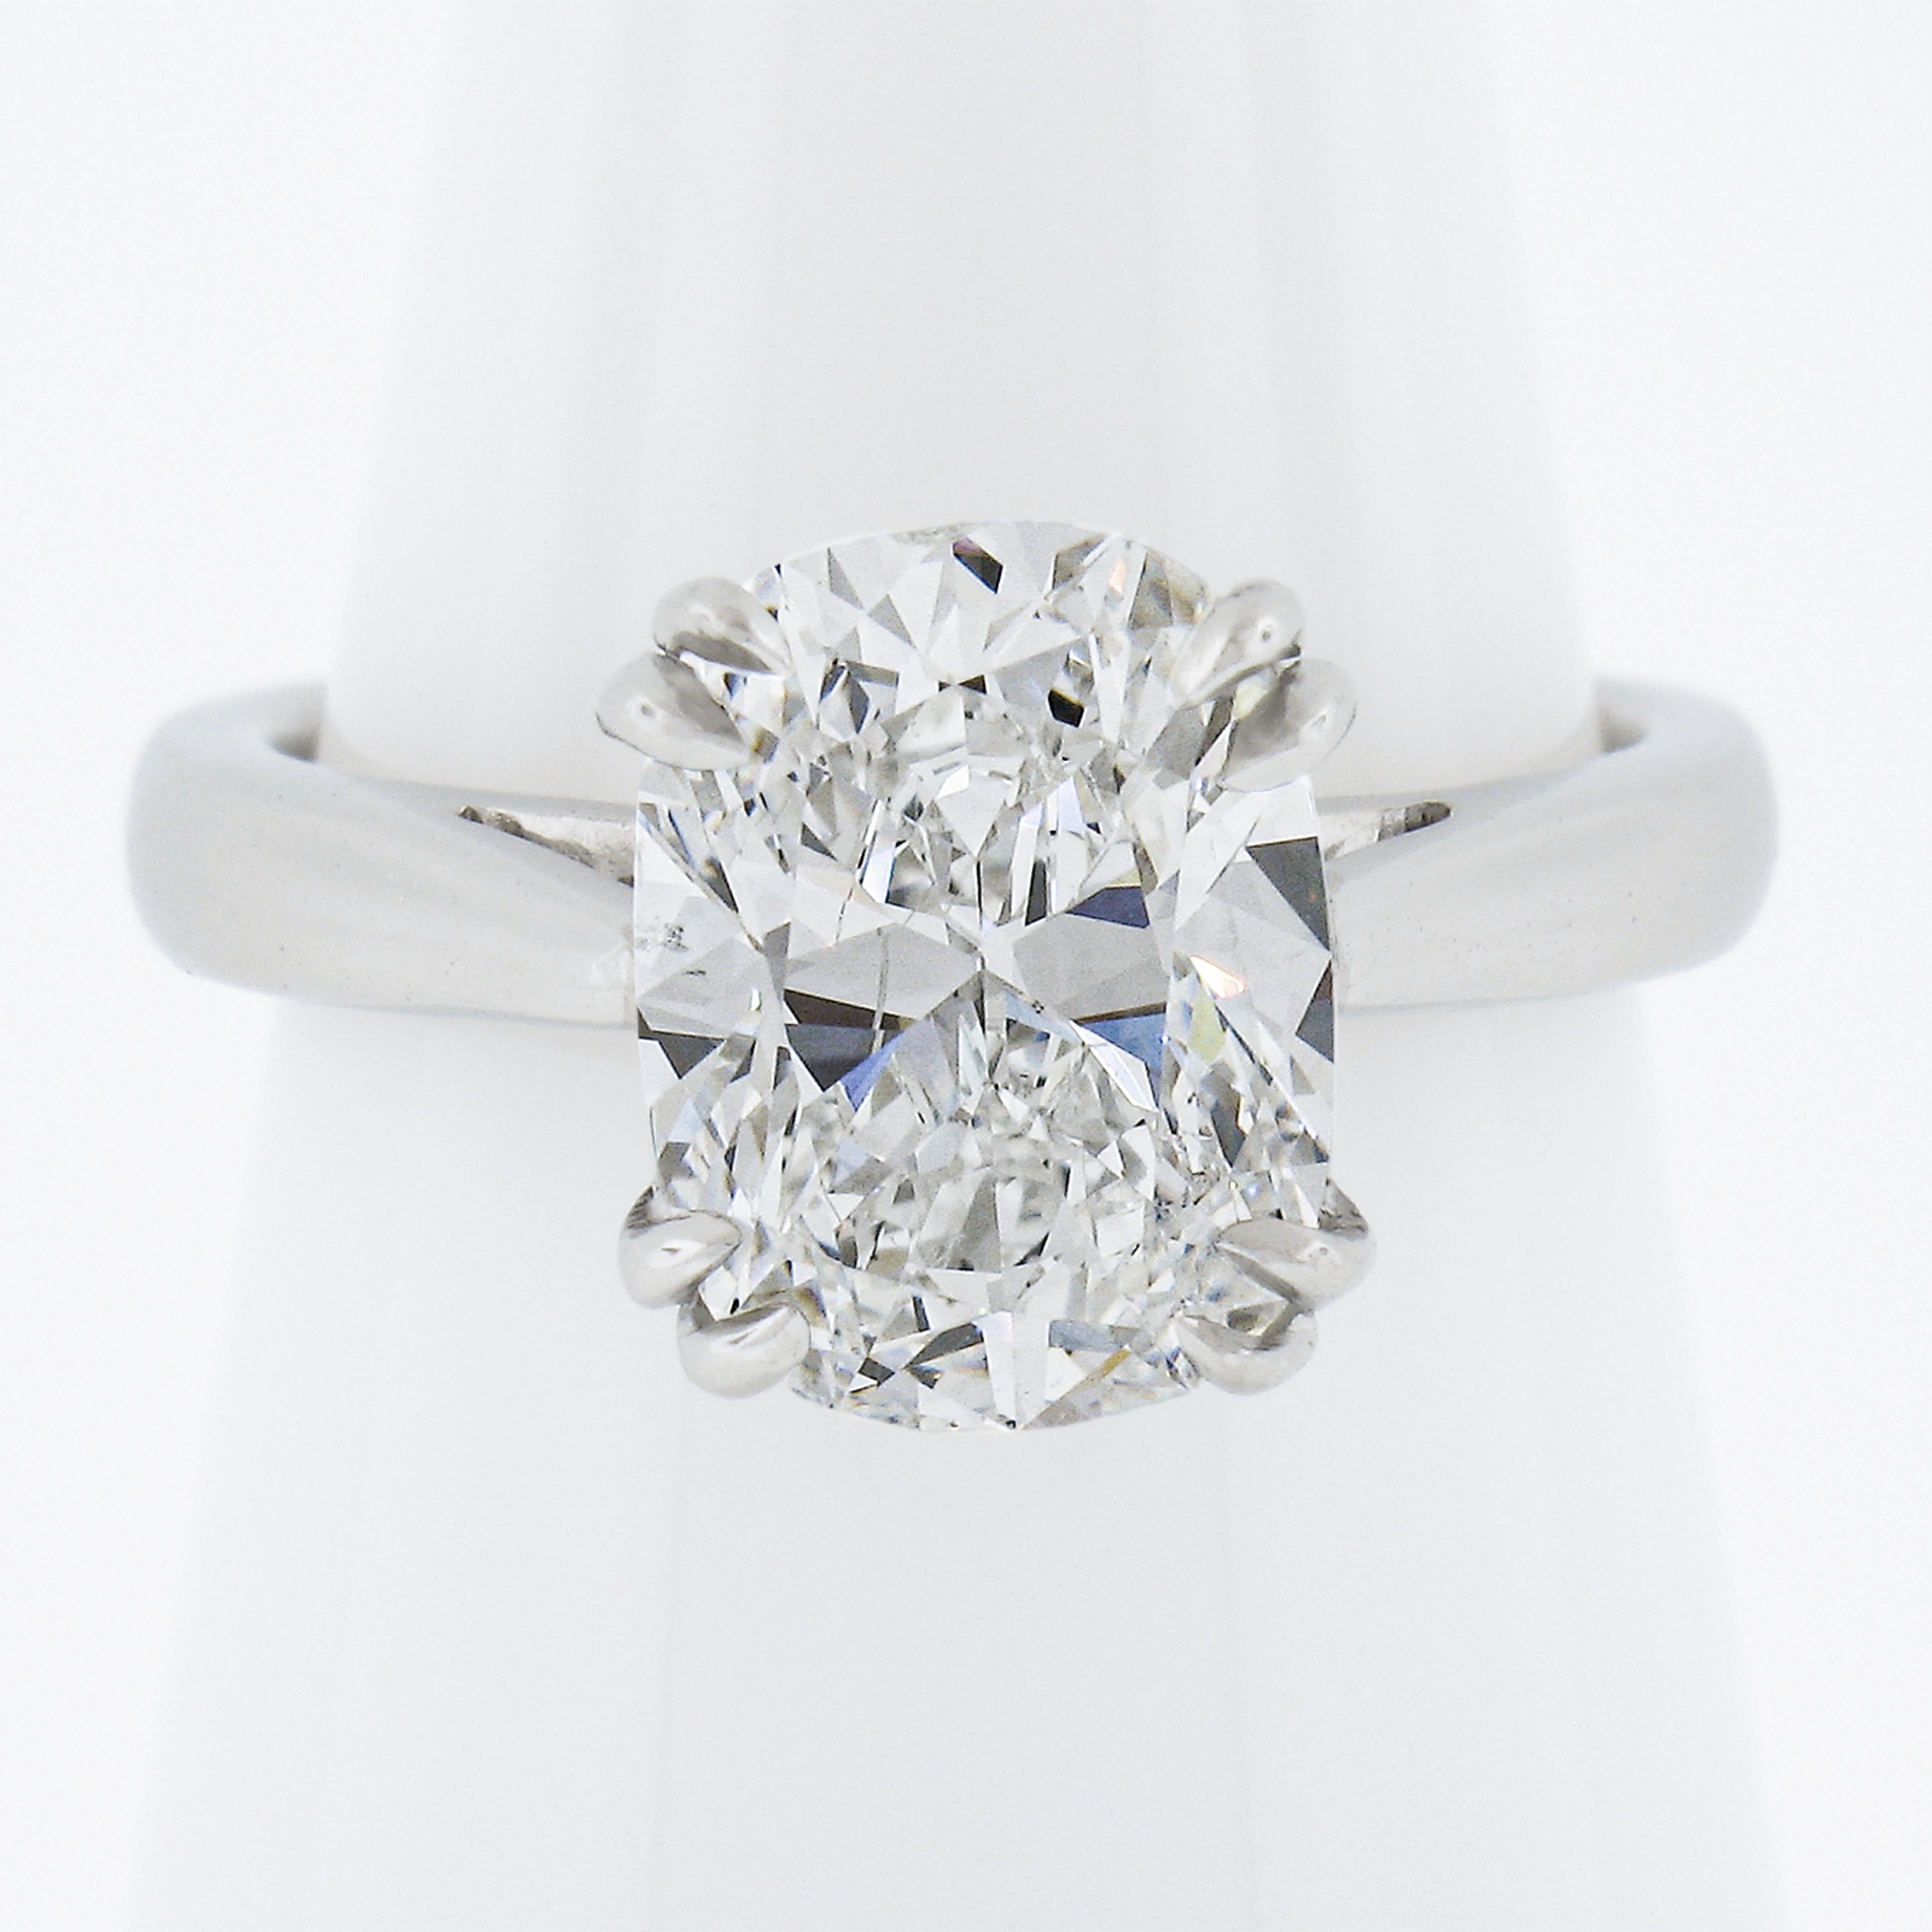 Platinum 3.09ct GIA Elongated Cushion Cut Diamond Solitaire Engagement Ring In Excellent Condition For Sale In Montclair, NJ